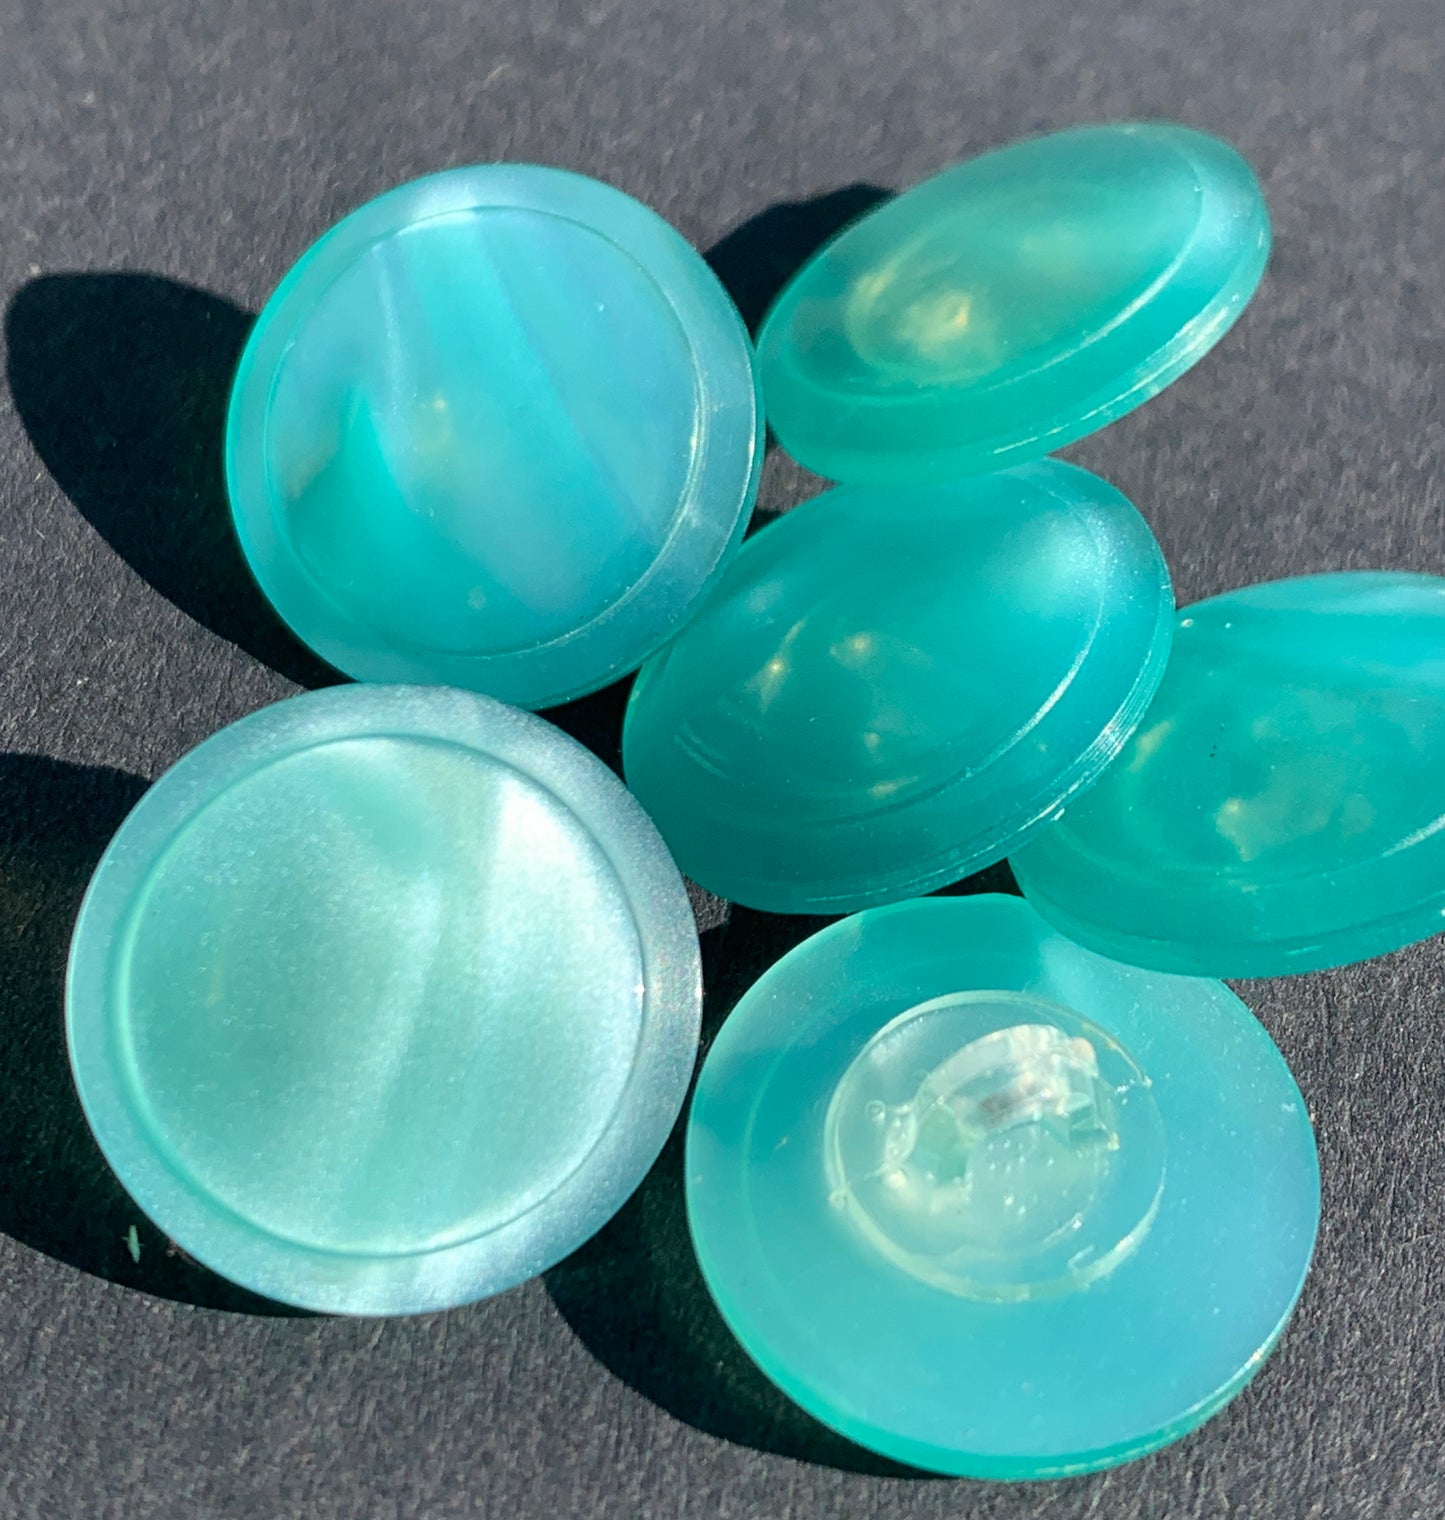 6 or 24 Silvery Aqua Turquoise Vintage Moonglow Lucite Buttons 1.5cm or 2cm -Made in England